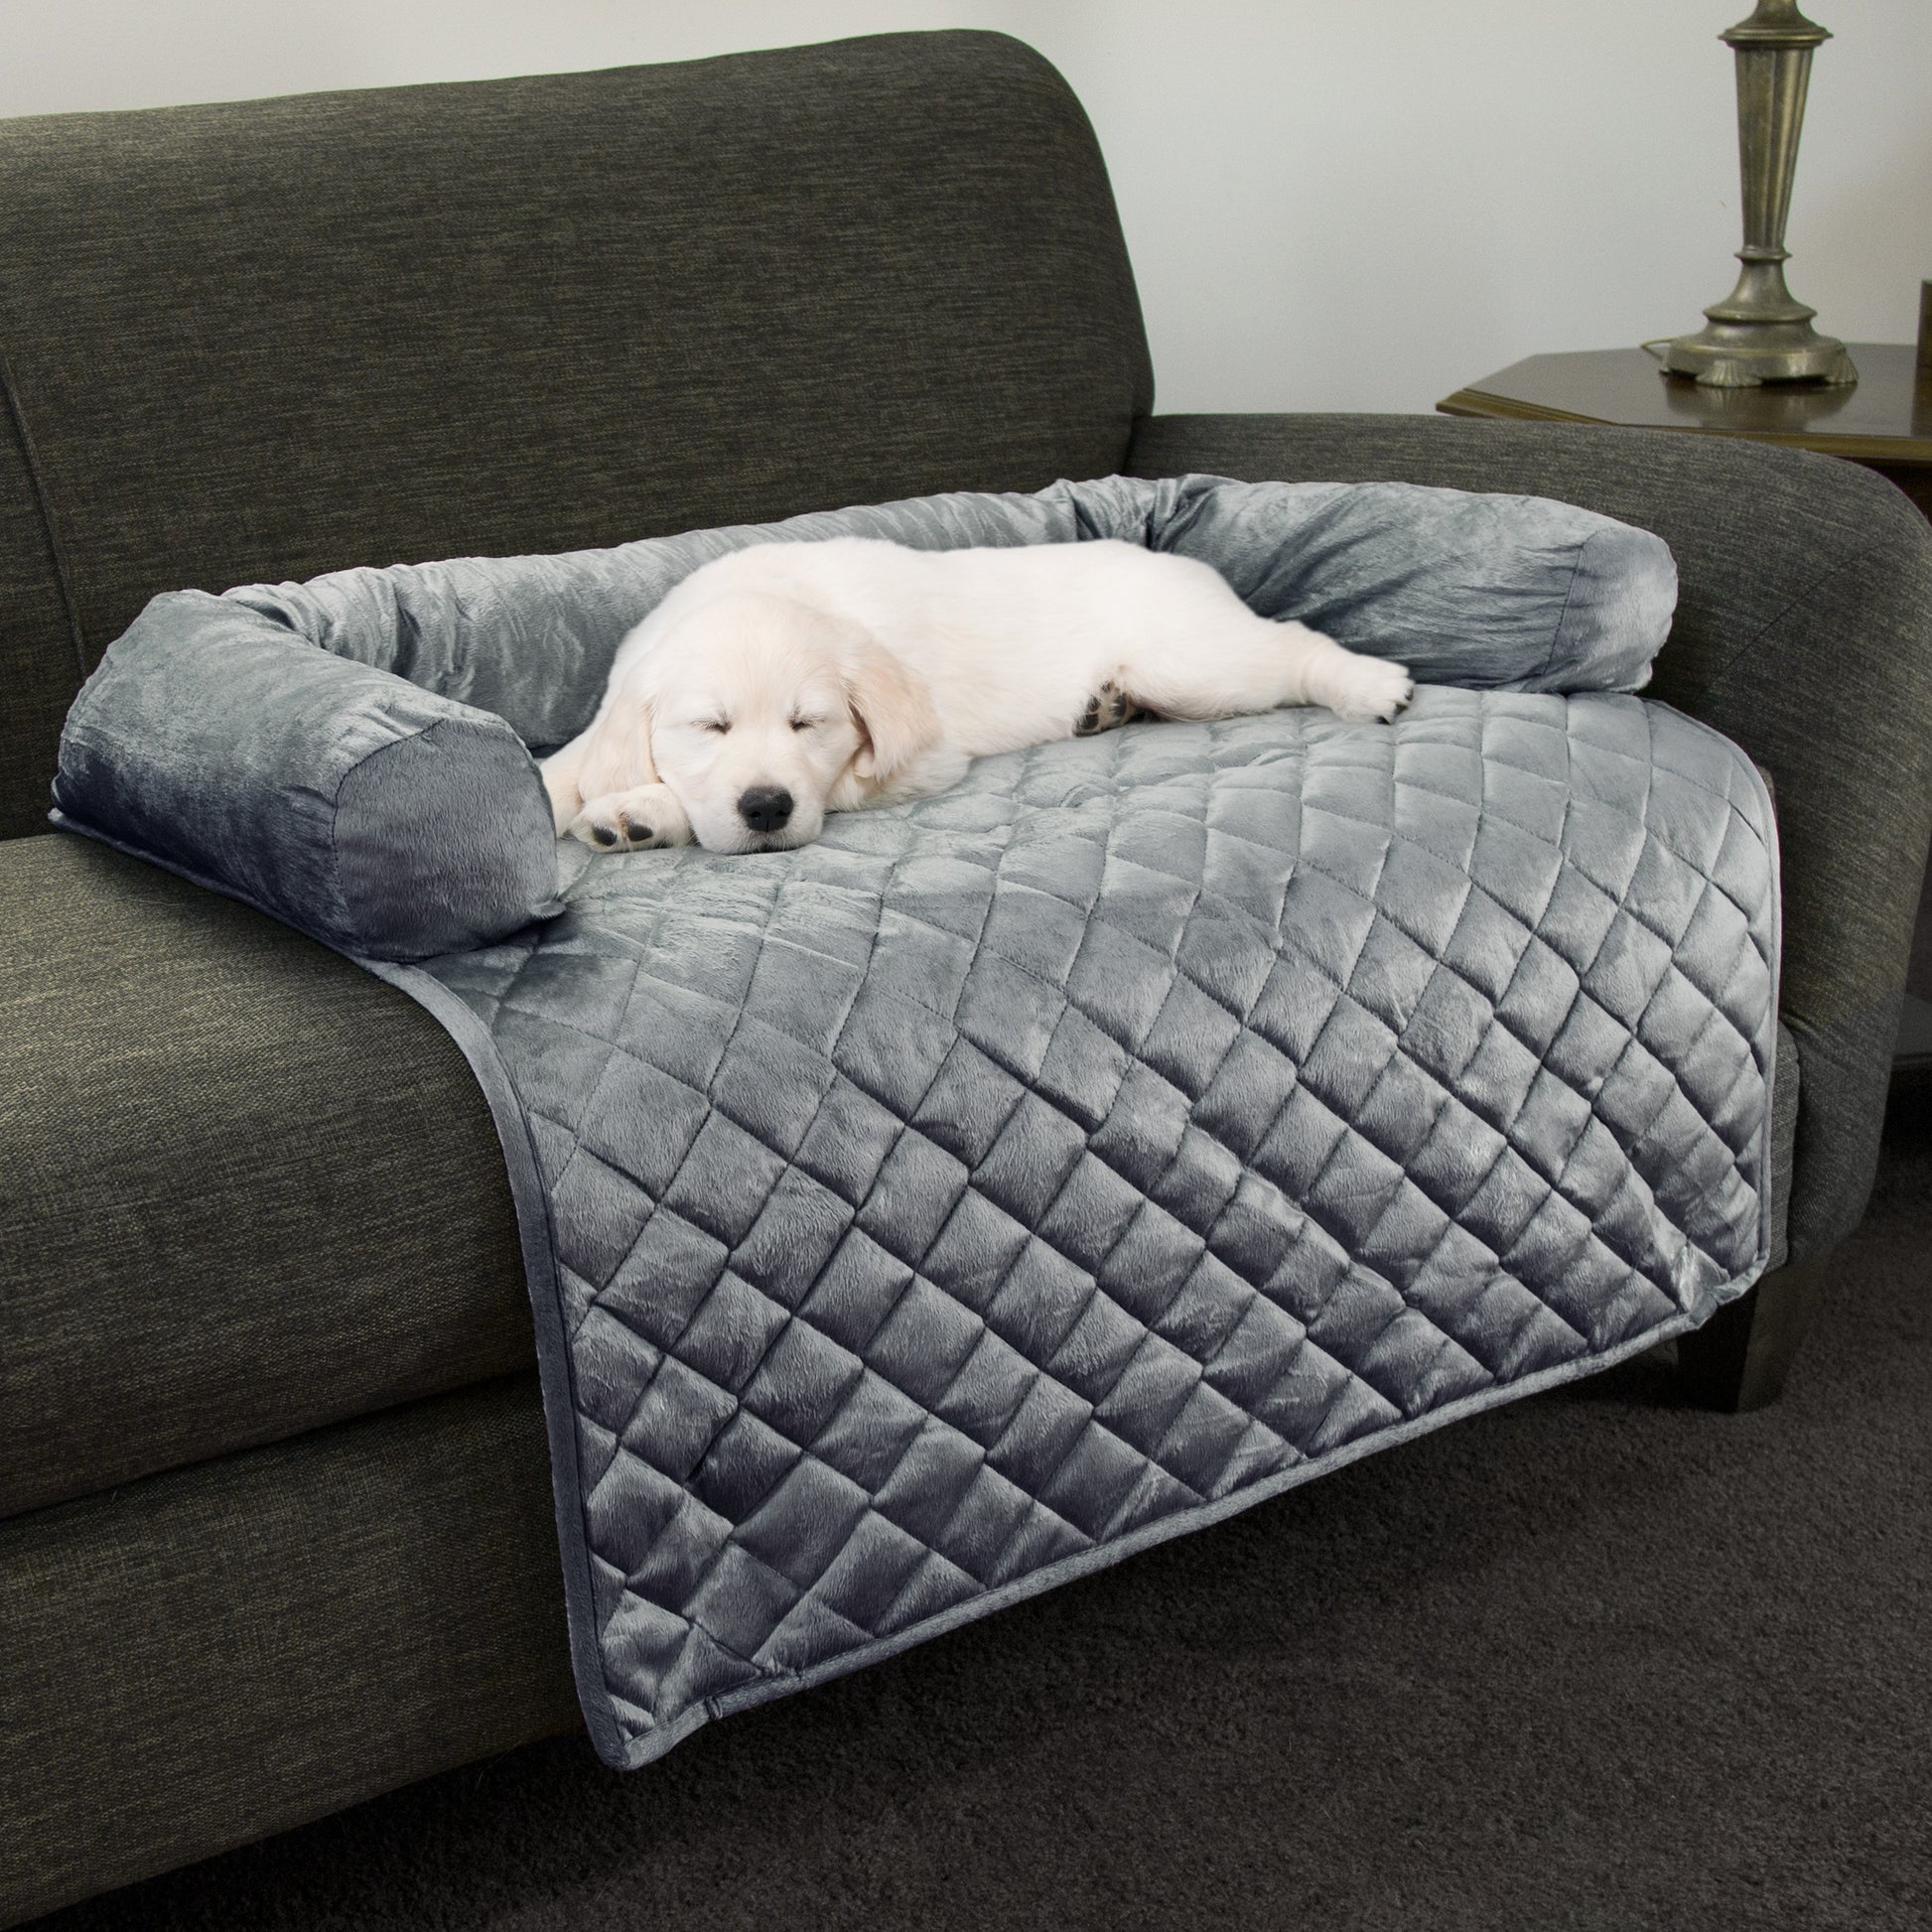 3 Dog Pet Supply Quilted Back Seat Protector with Fleece Bolster - Grey